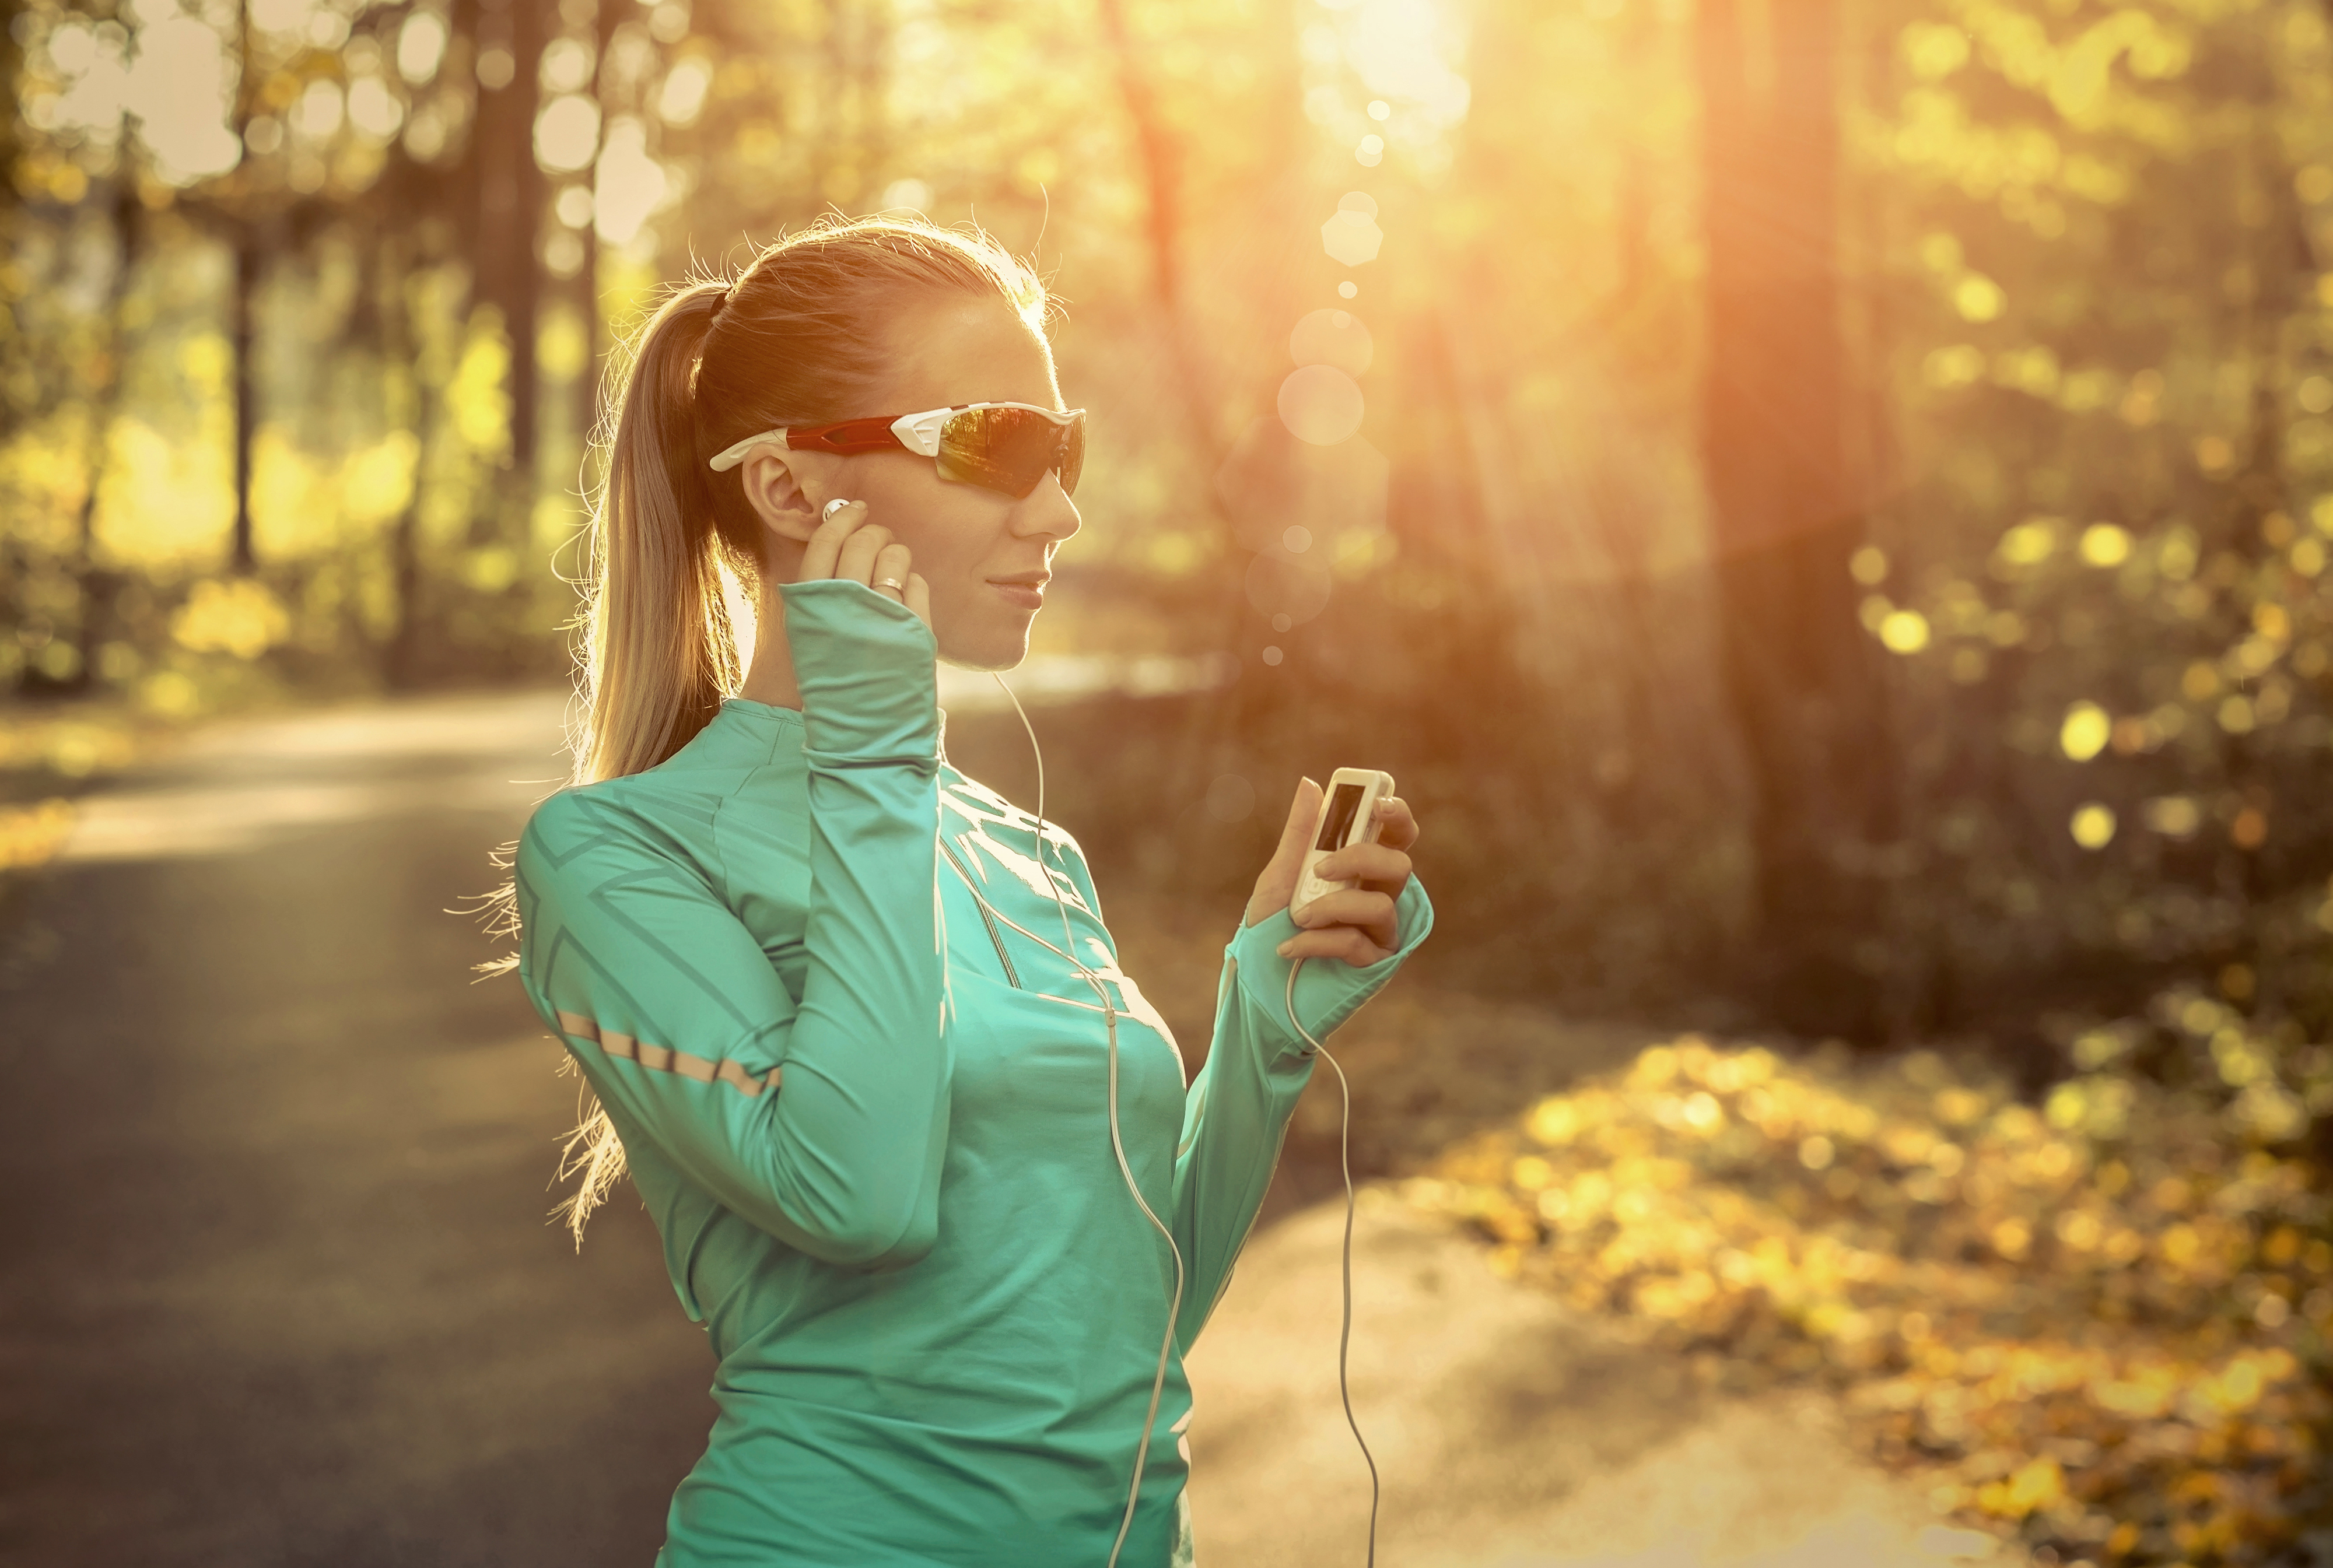 Woman outdoors with headphones in wearing sport sunglasses